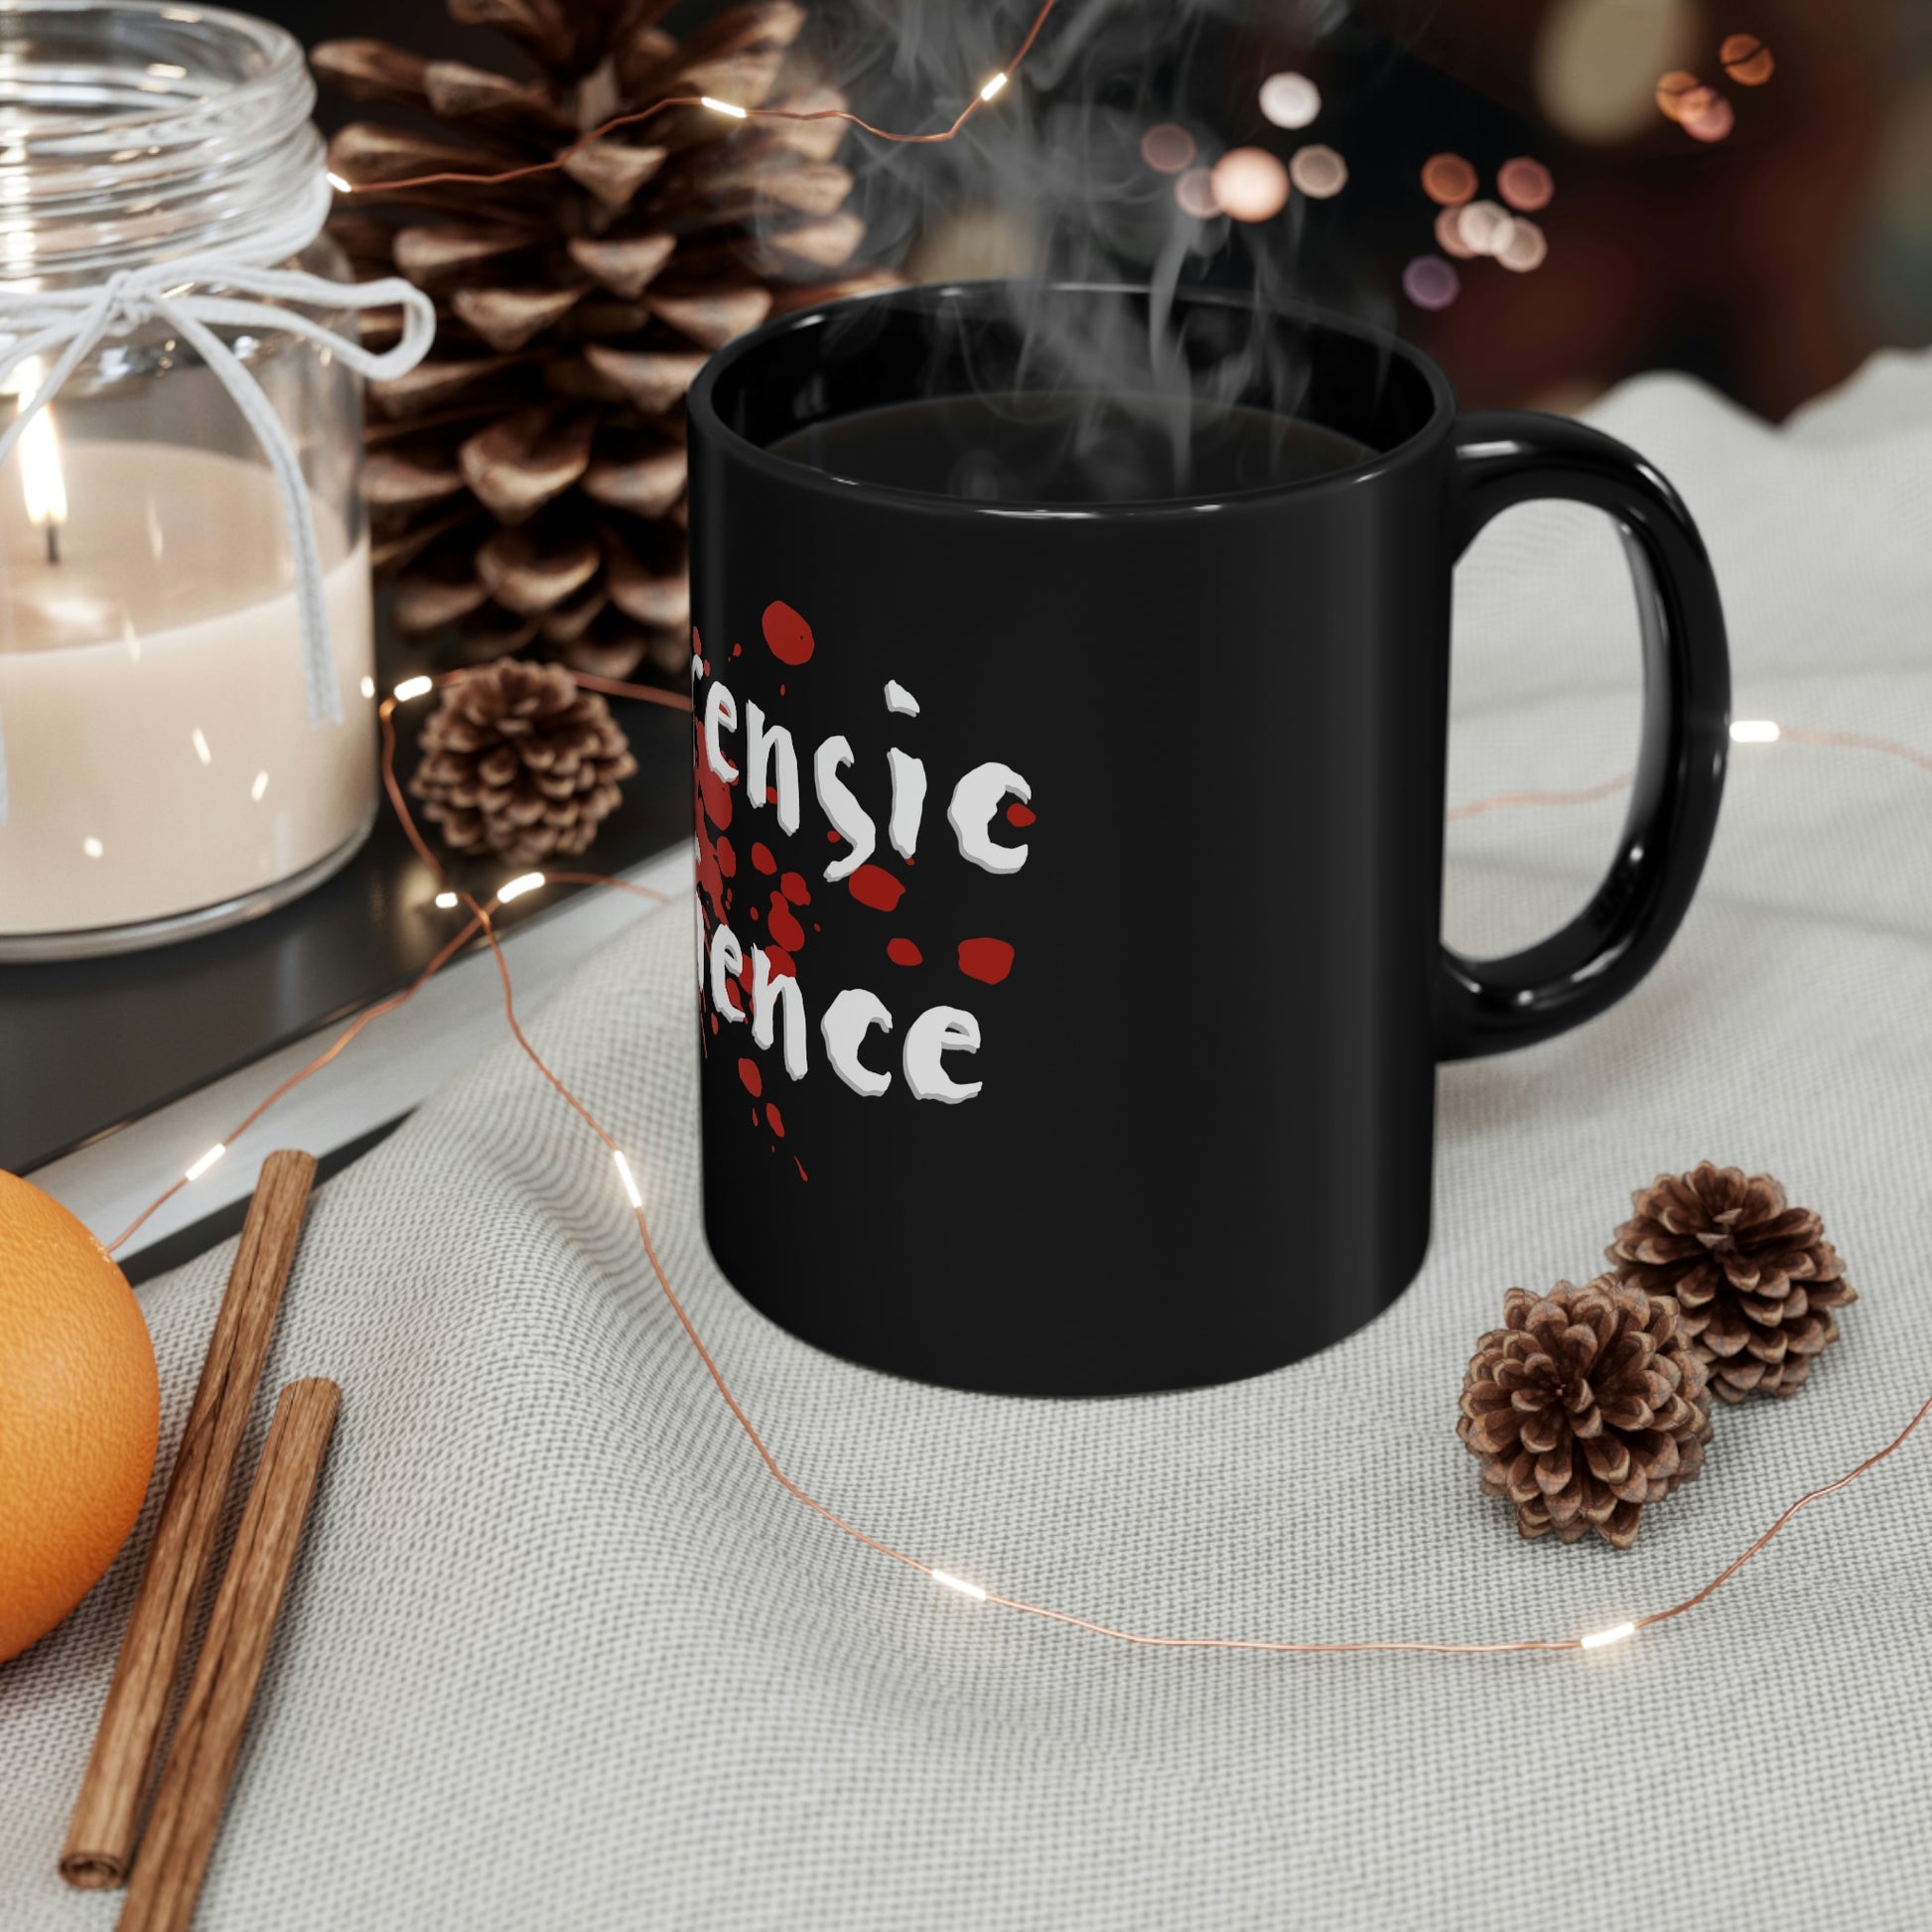 It’s BPA and lead-free, microwave and dishwasher-safe, and made of black durable ceramic in 11-ounce sizes. The high-quality sublimation printing makes this black ceramic mug the perfect gift for your true coffee, tea, or hot chocolate lover.